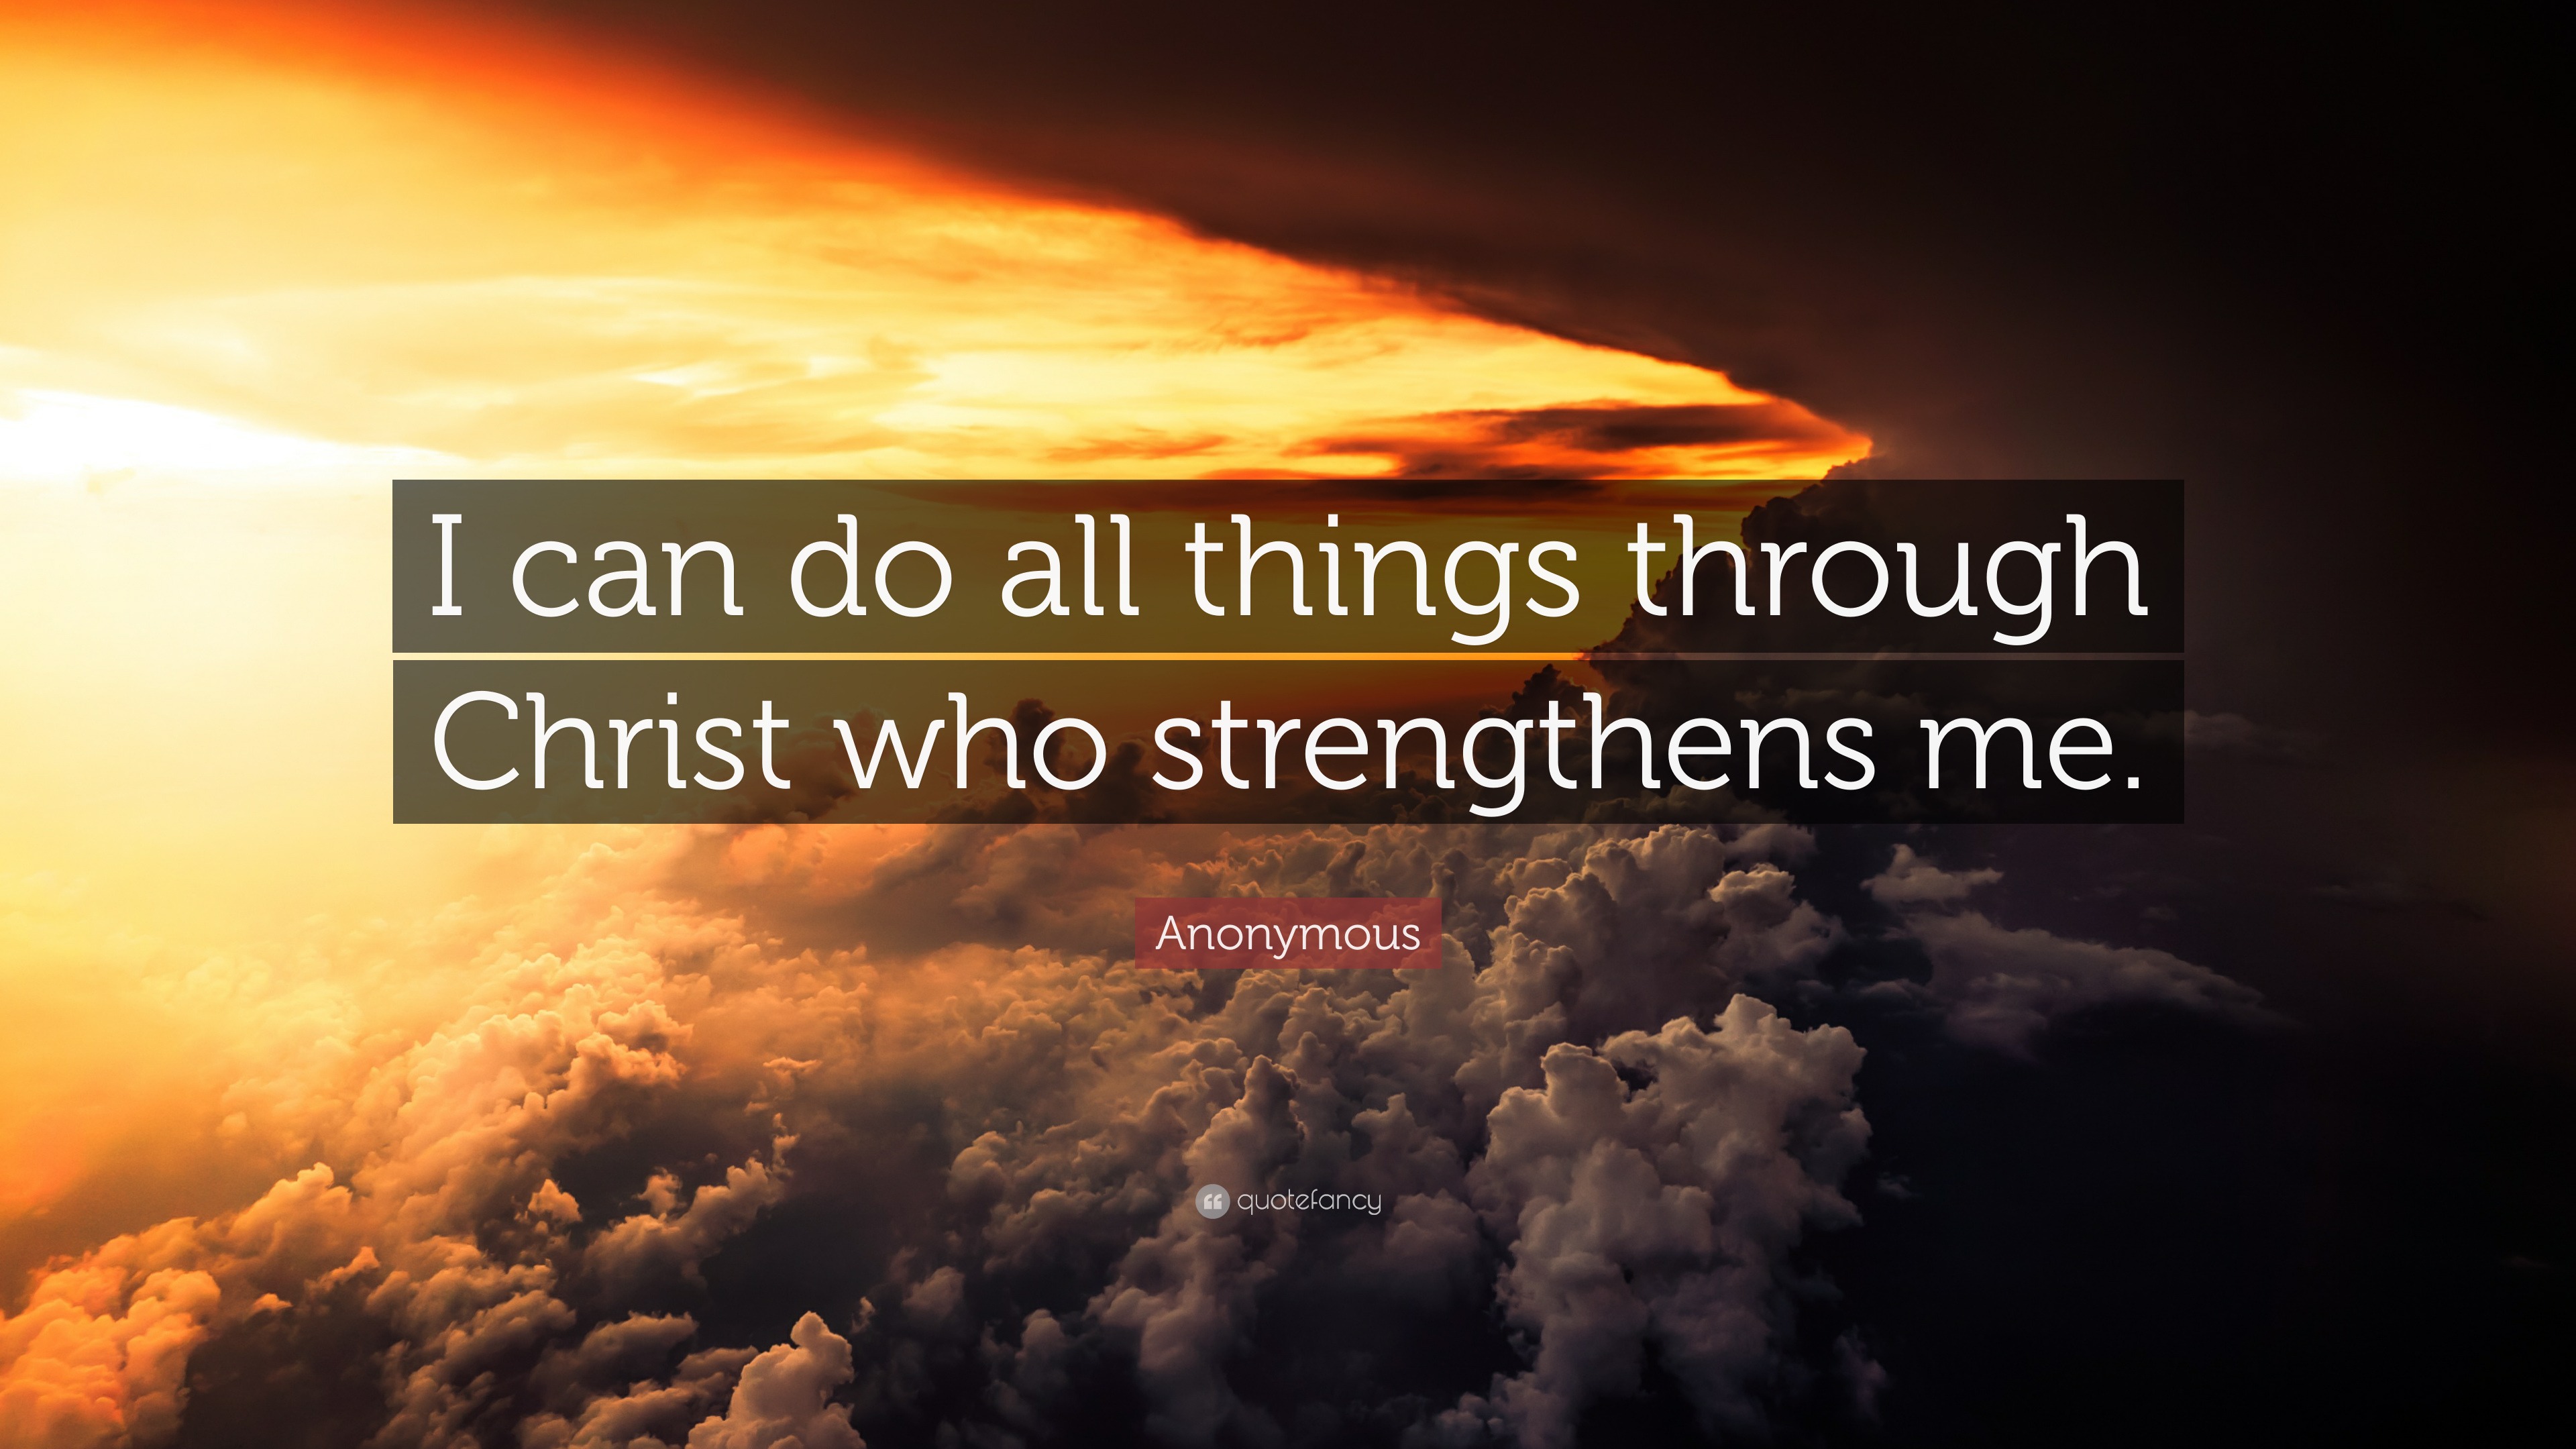 Anonymous Quote “I can do all things through Christ who strengthens me.”